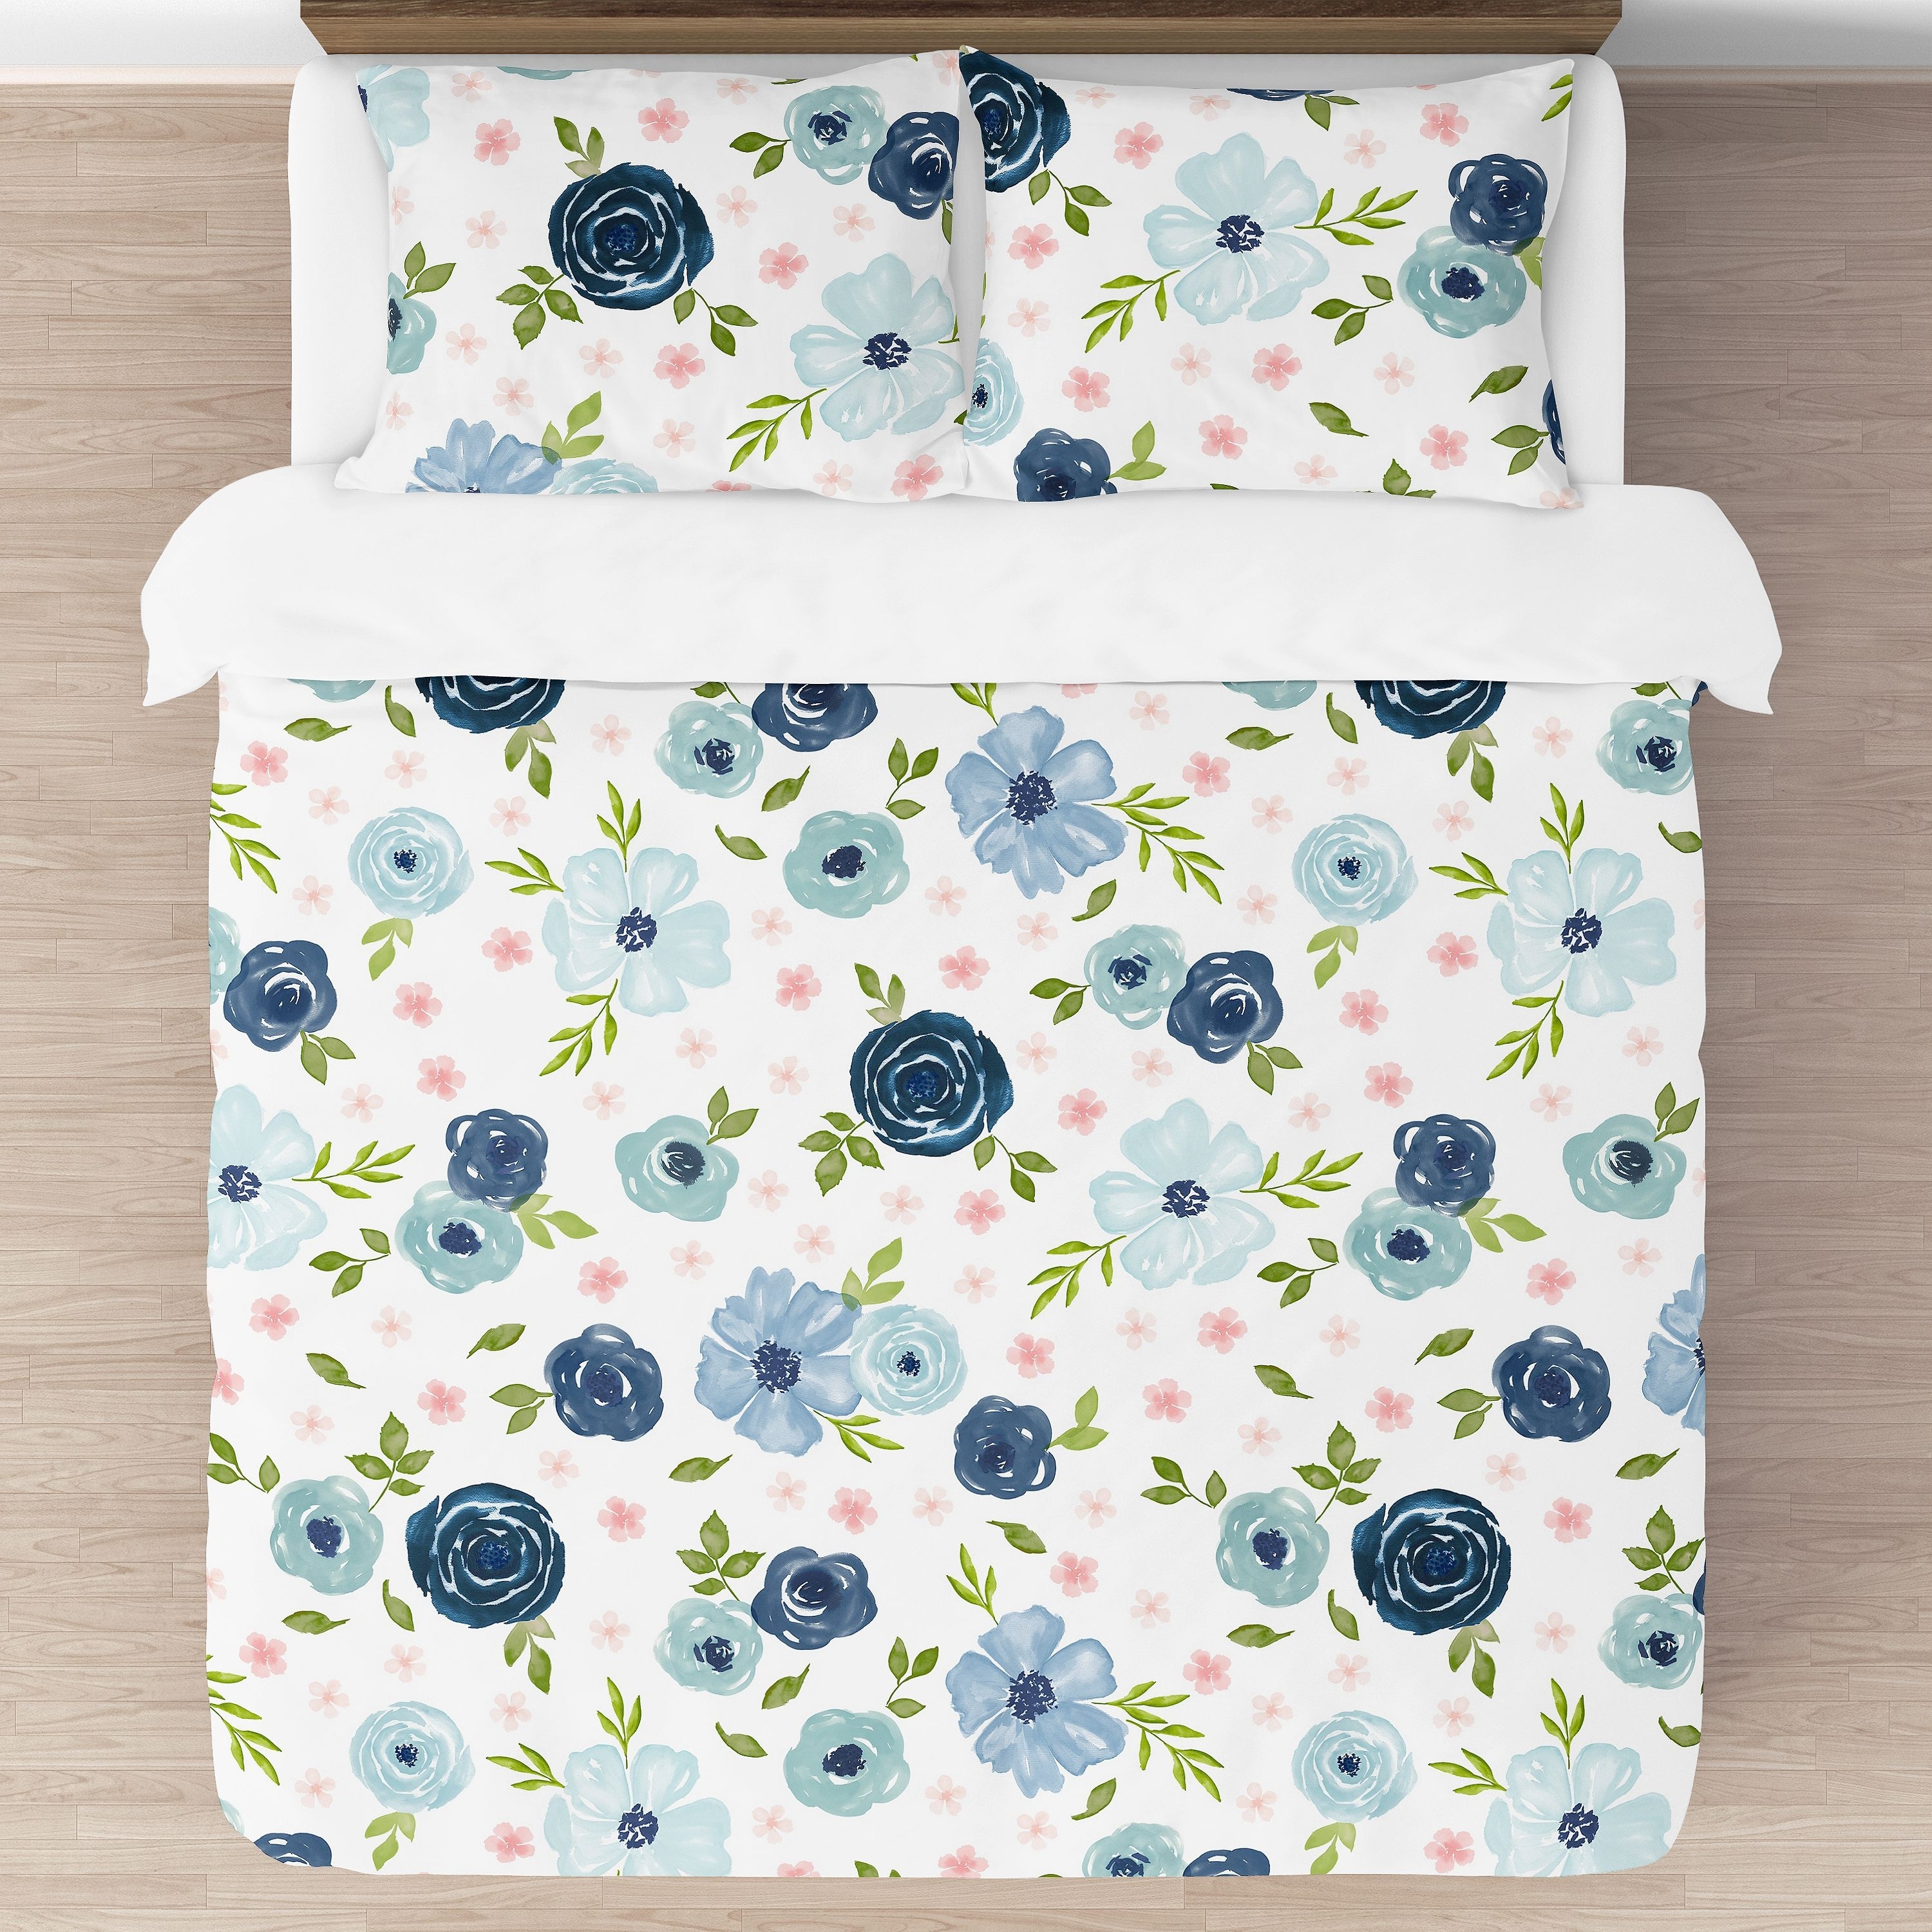 https://ak1.ostkcdn.com/images/products/is/images/direct/c54e59b1a1737b140f0d195ab85043fdb7876710/Navy-Blue-and-Pink-Watercolor-Floral-Girl-3pc-Full-Queen-Comforter-Set---Blush-Green-White-Shabby-Chic-Flower.jpg